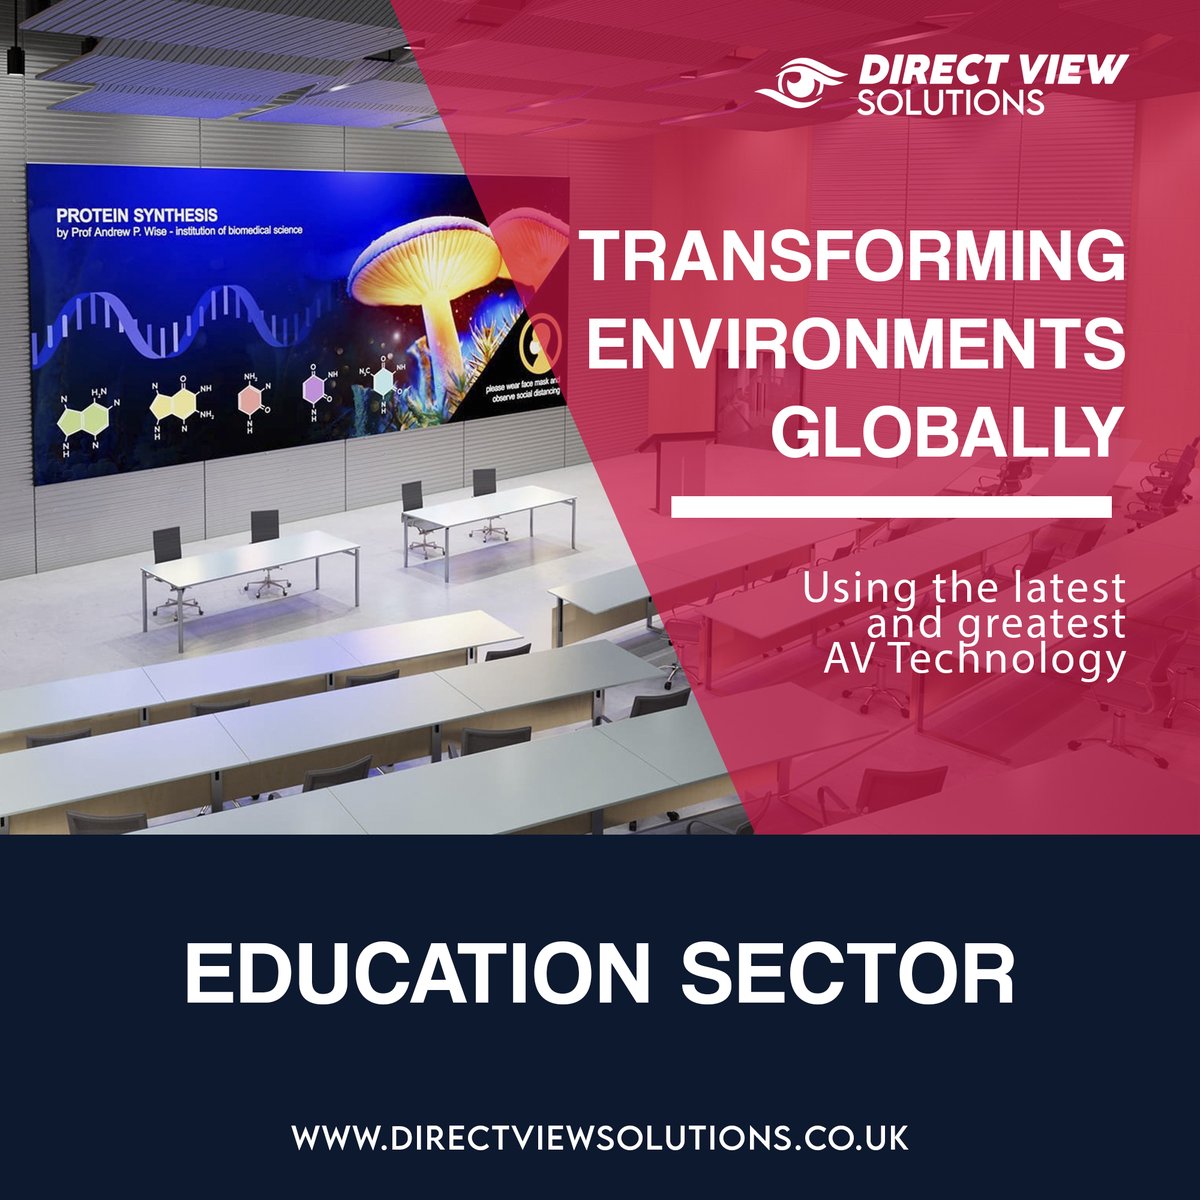 Revolutionising Education with DVLED! 📚

Say hello to the future of #learning! 🚀 #DVLED Displays are transforming classrooms into immersive hubs of knowledge. With vibrant colours and dynamic content, students are engaged like never before.

#EducationEvolved #ProAV #AVTweeps🎓